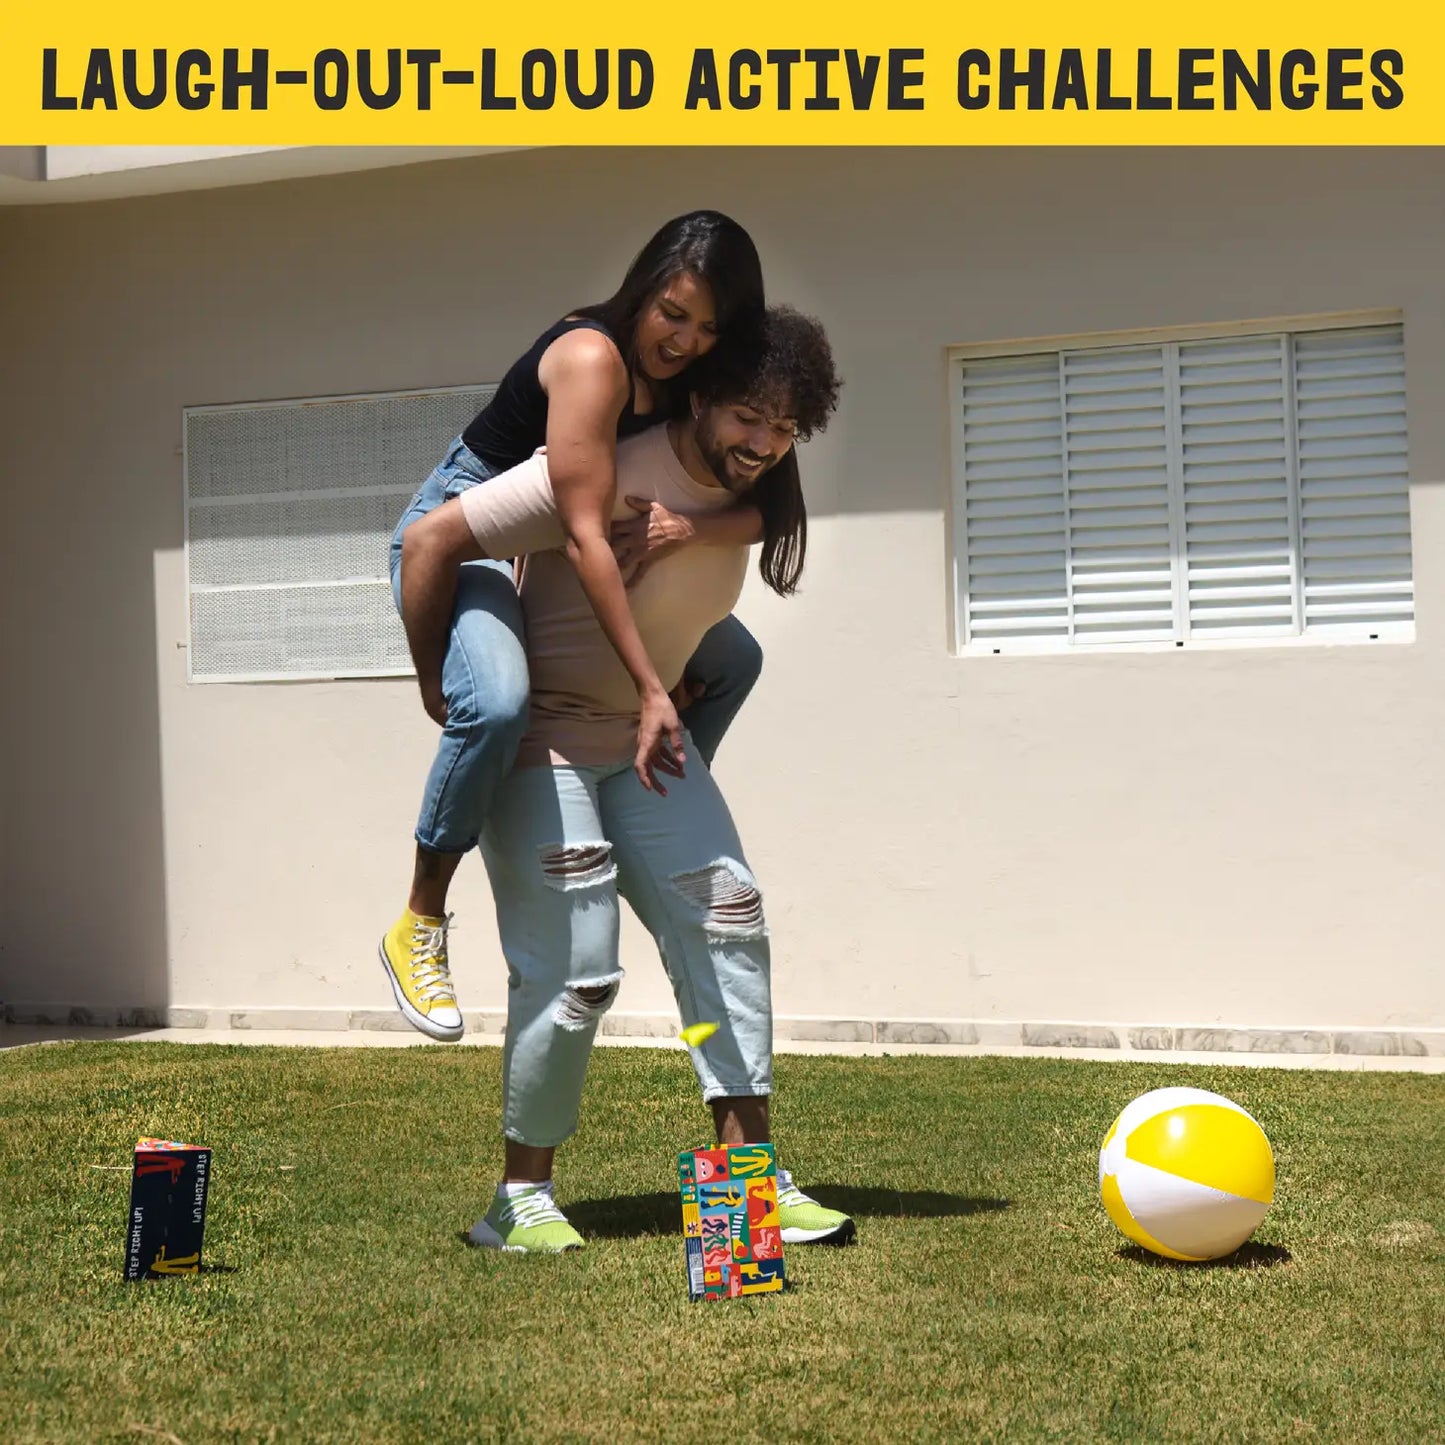 Lucky Egg - Step Right Up - Fun Indoor Outdoor Party Game Challenges